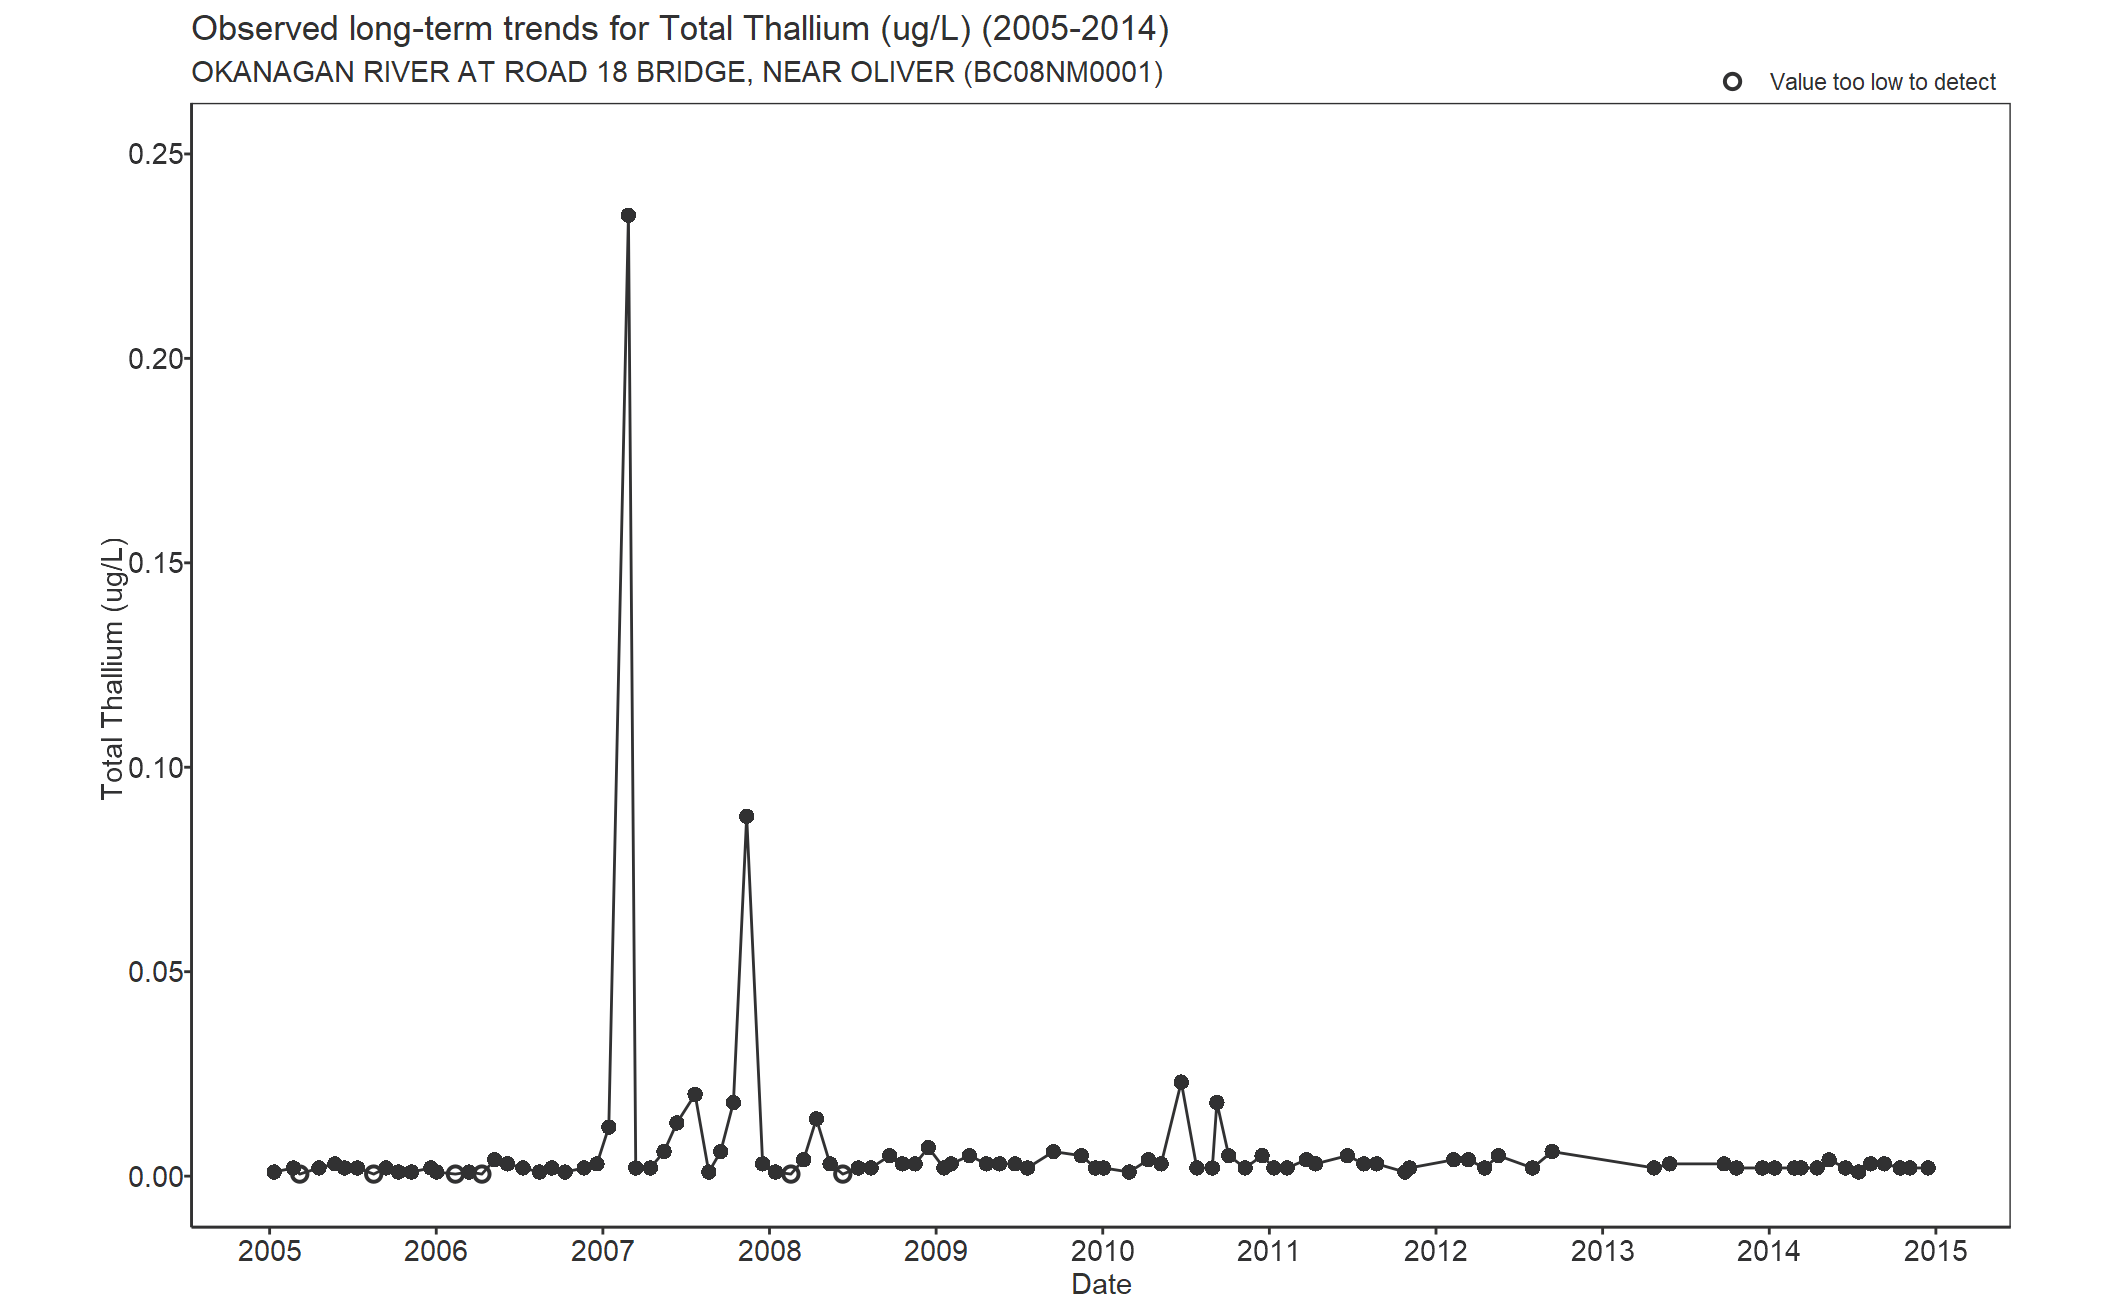 Observed long-term trends for Total Thallium (2005-2014)